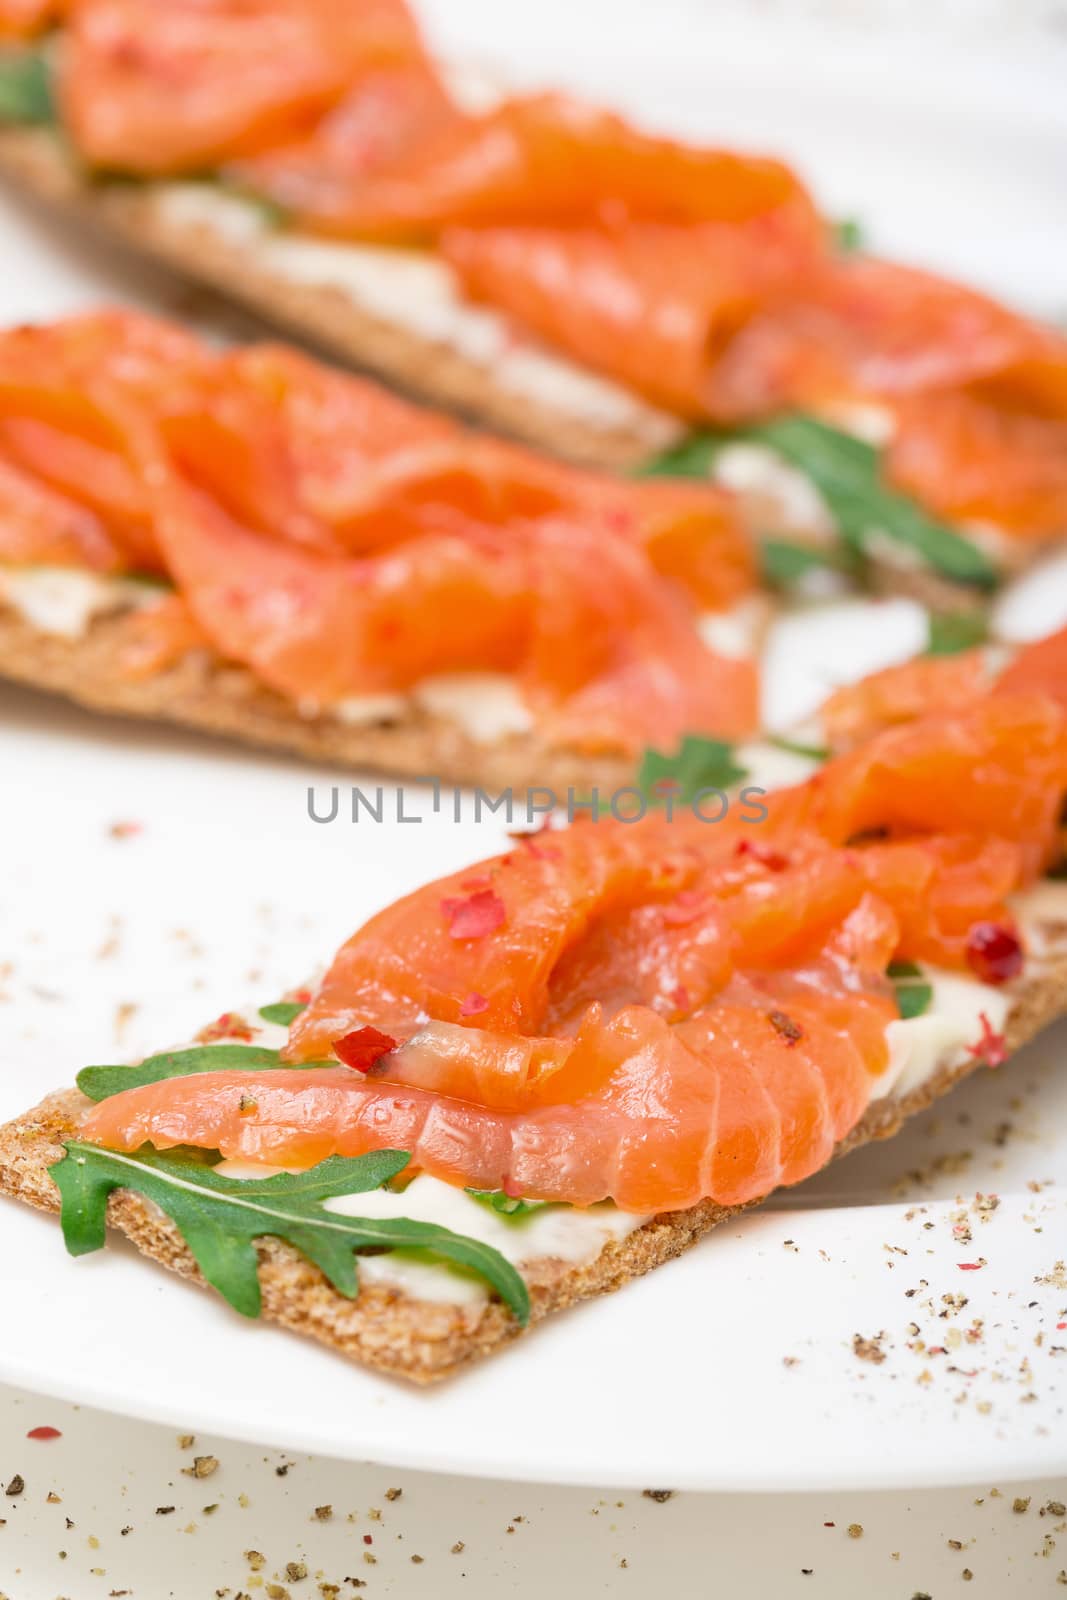 Salted salmon on crispy bread with cheese and arugula by Discovod